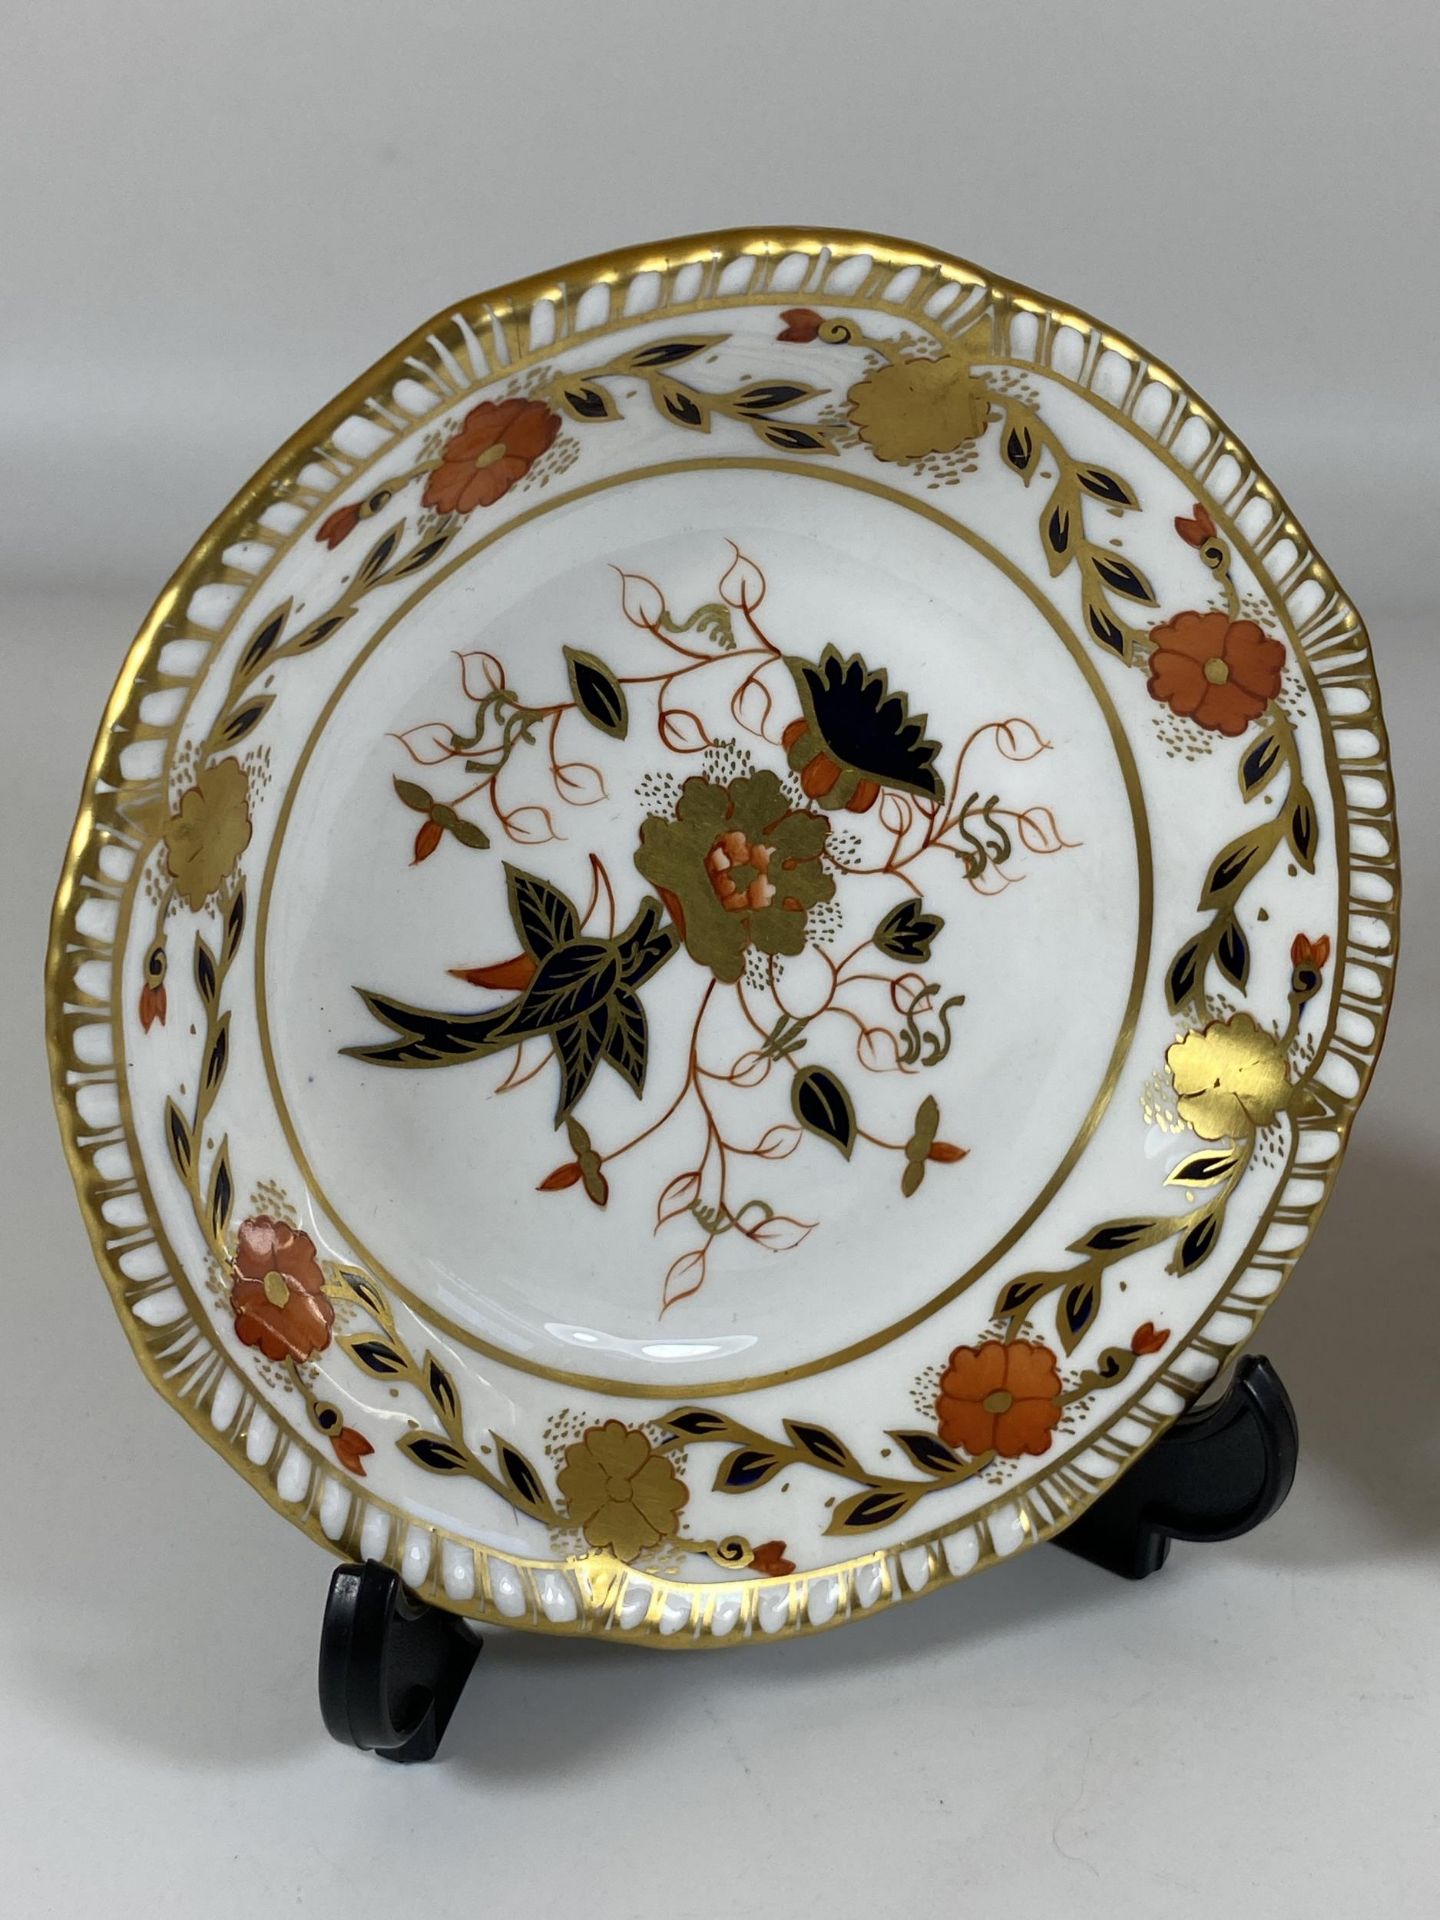 TWO ITEMS - A ROYAL CROWN DERBY IMARI A962 PATTERN DISH AND A ROYAL DOULTON 'EMMA' HN3208 FIGURE - Image 2 of 8